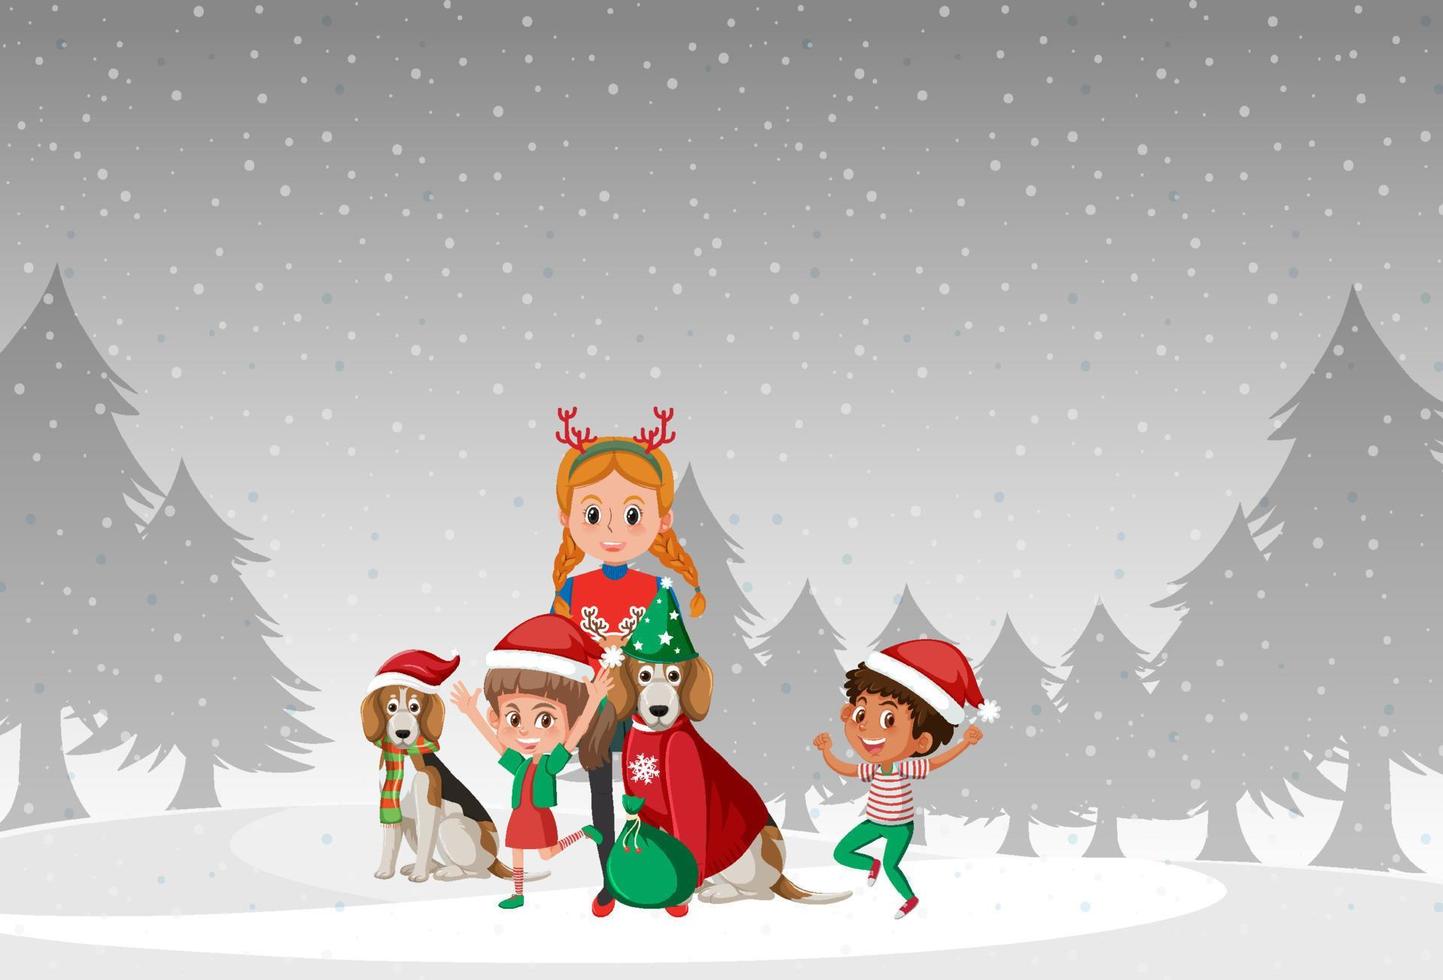 Christmas holidays with children in snow vector